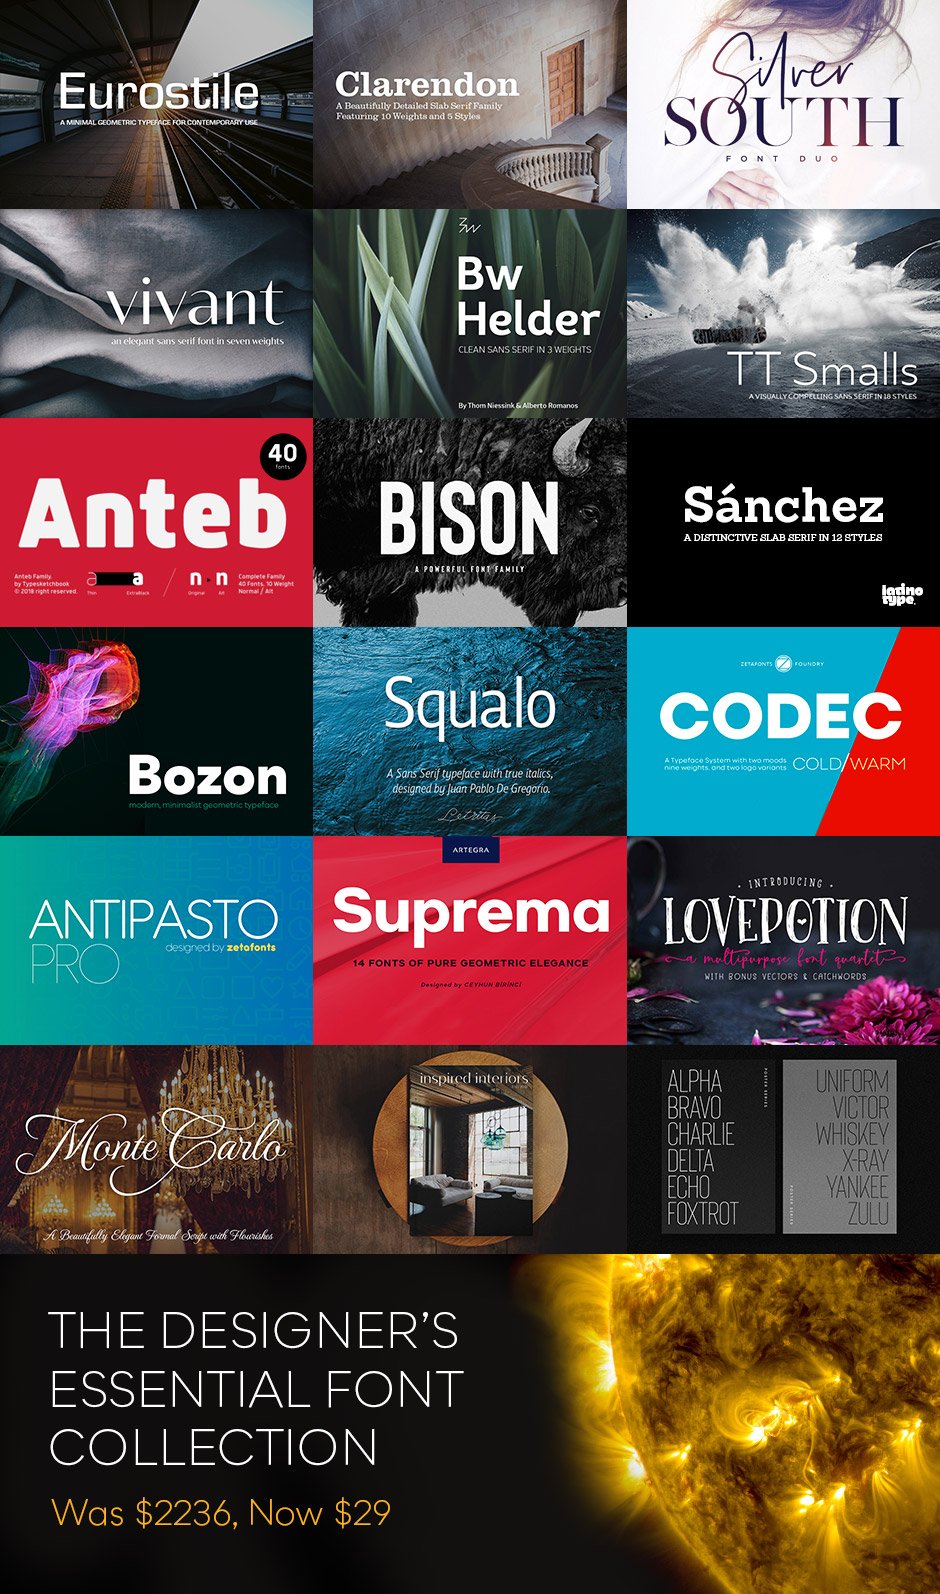 The Designers Essential Font Collection Grid Image